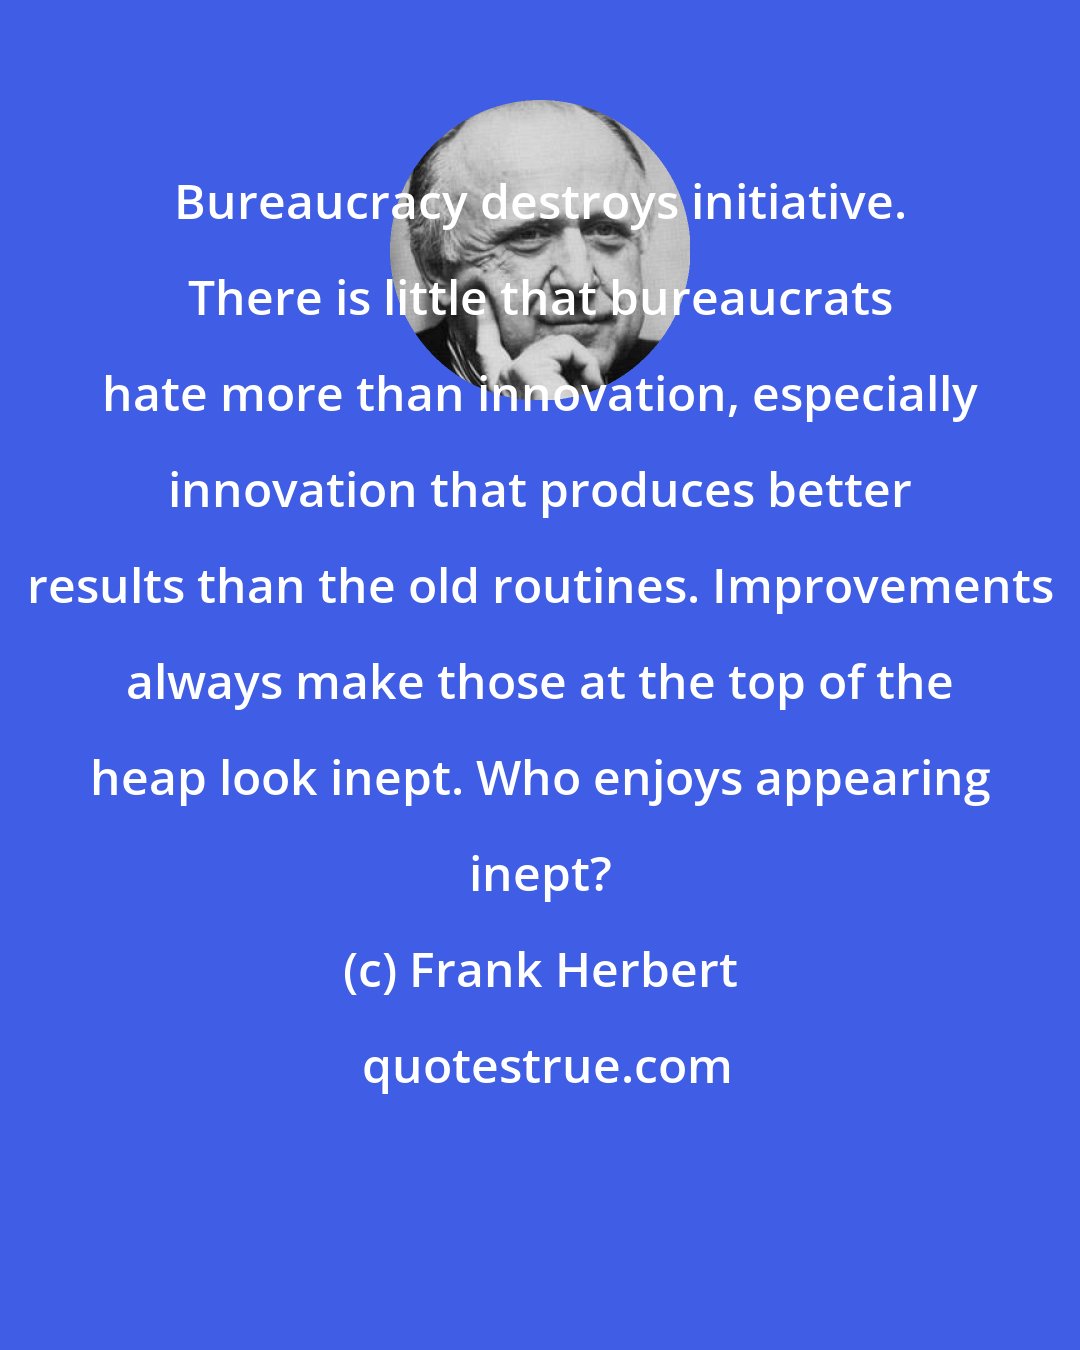 Frank Herbert: Bureaucracy destroys initiative. There is little that bureaucrats hate more than innovation, especially innovation that produces better results than the old routines. Improvements always make those at the top of the heap look inept. Who enjoys appearing inept?